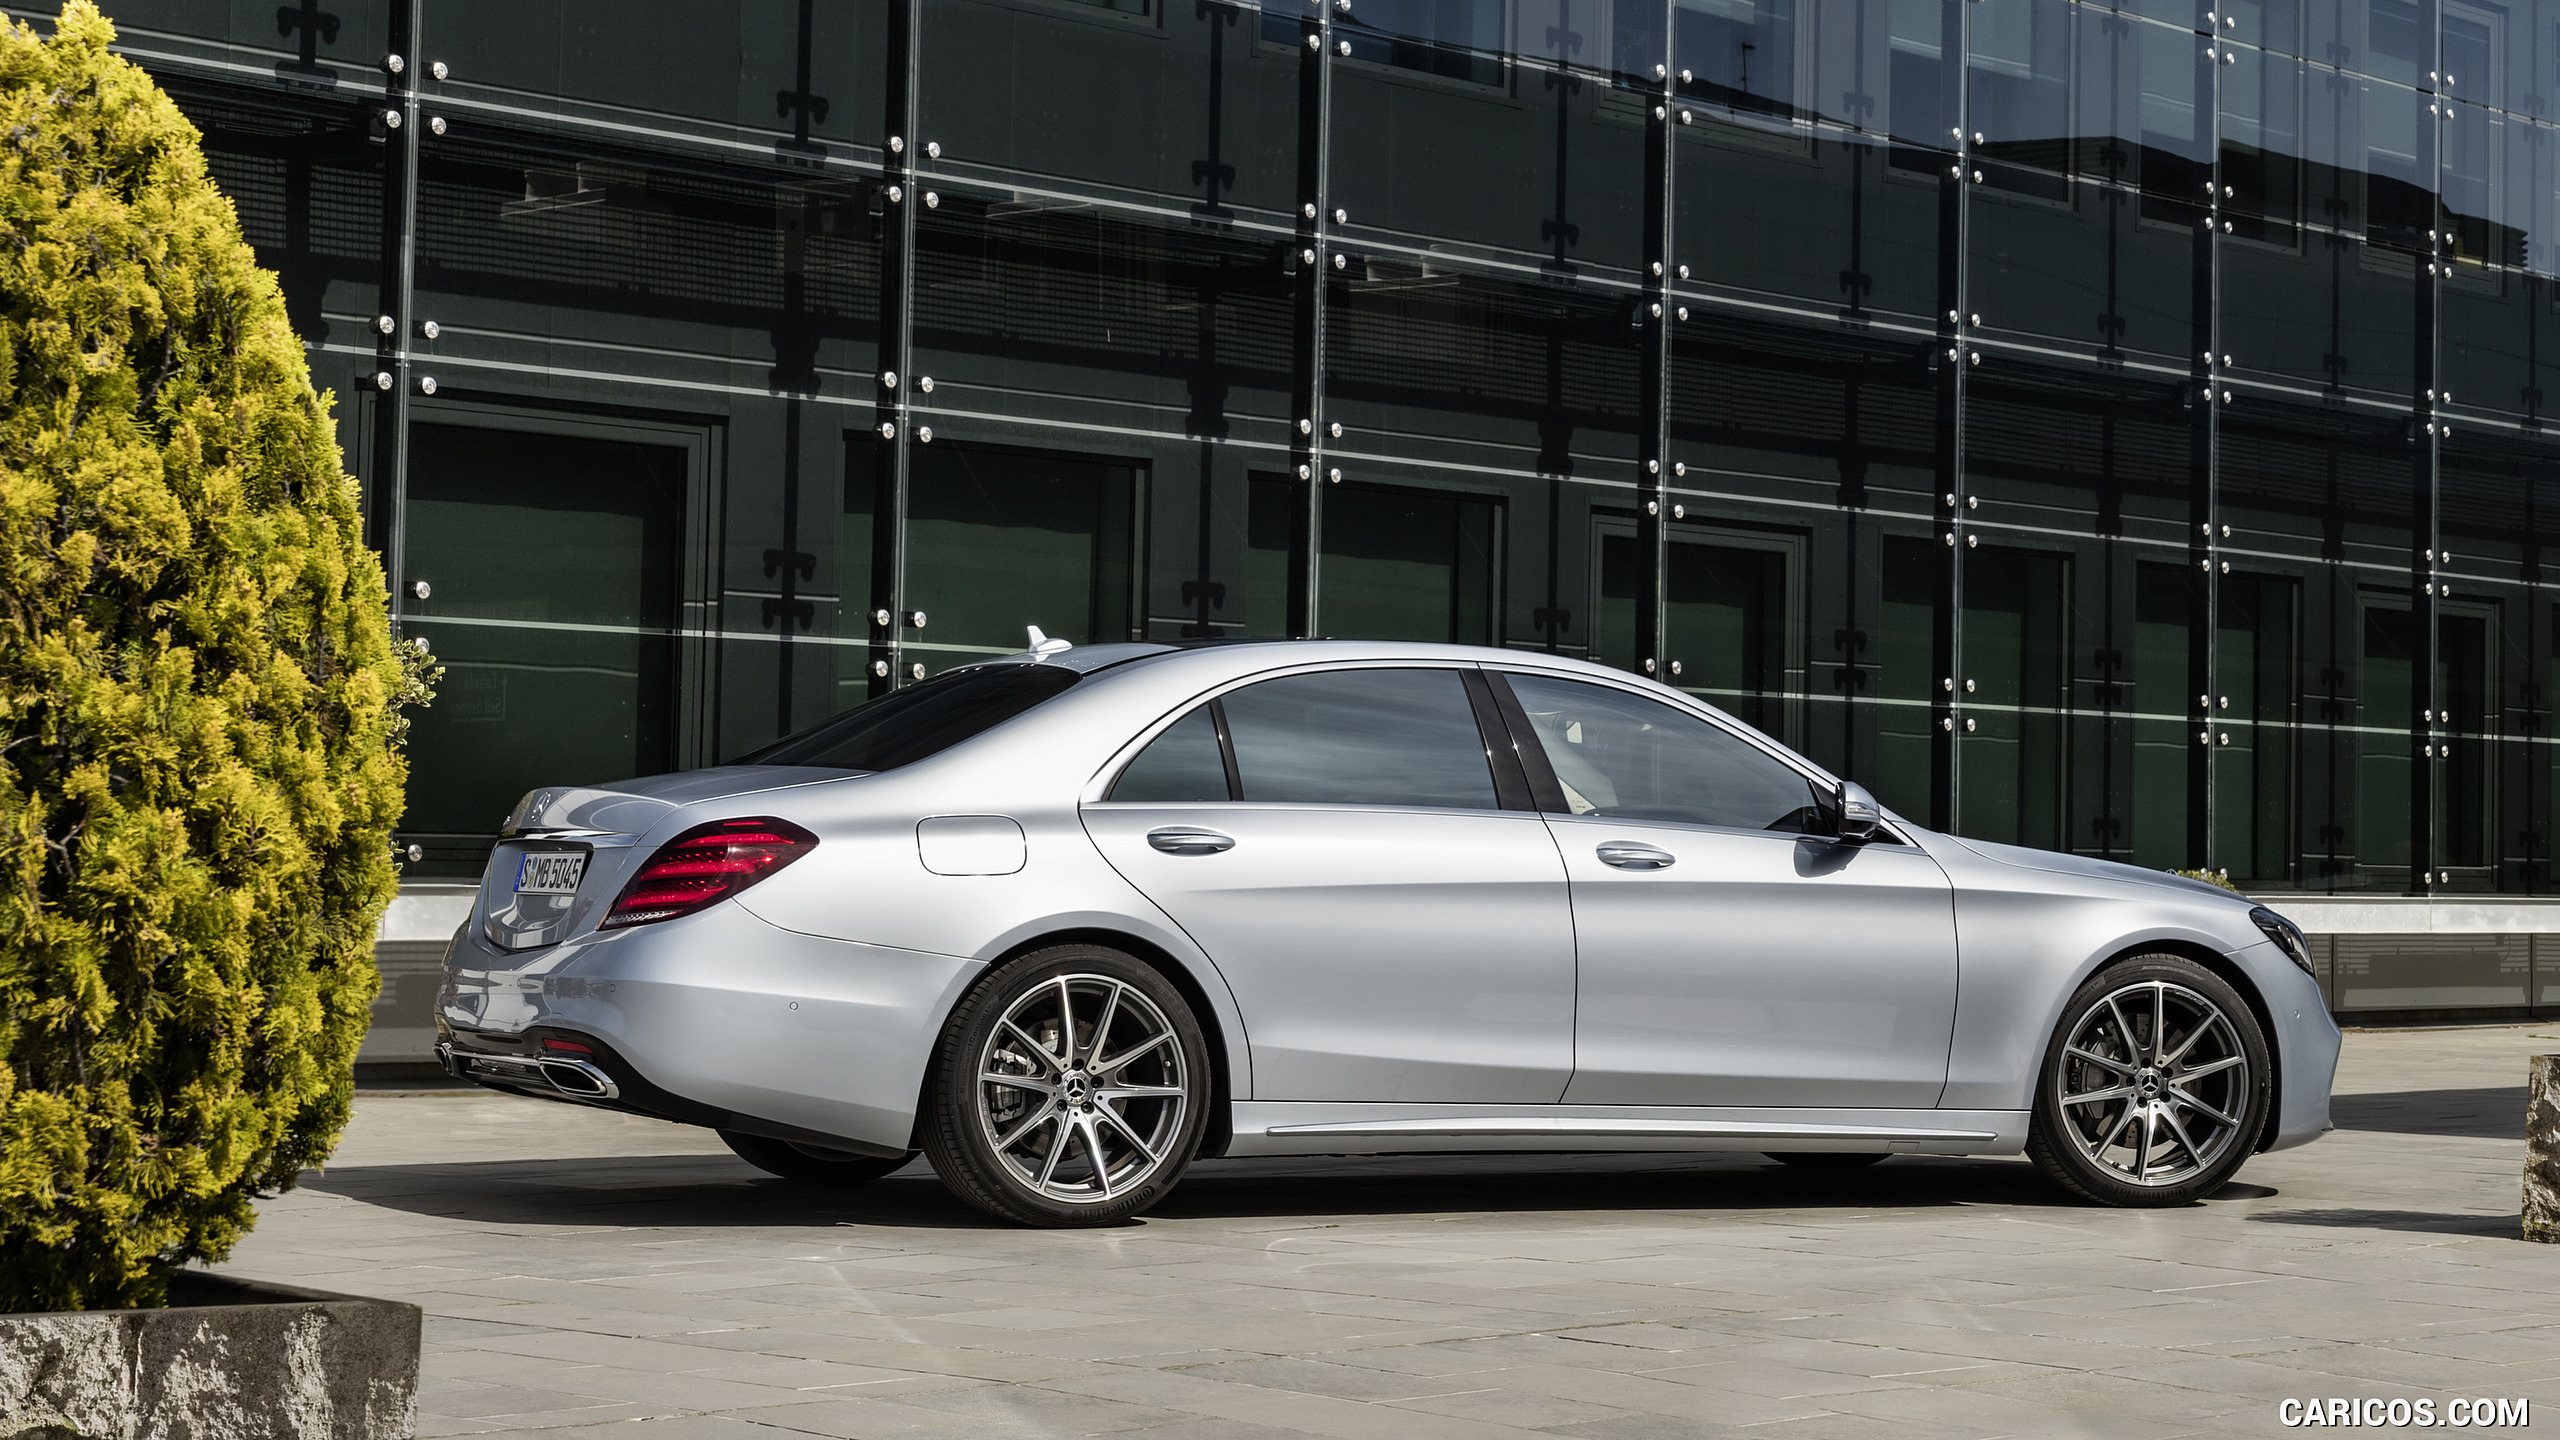 2018 Mercedes-Benz S-Class AMG Line LWB (Color: Diamond Silver), #5 of 156